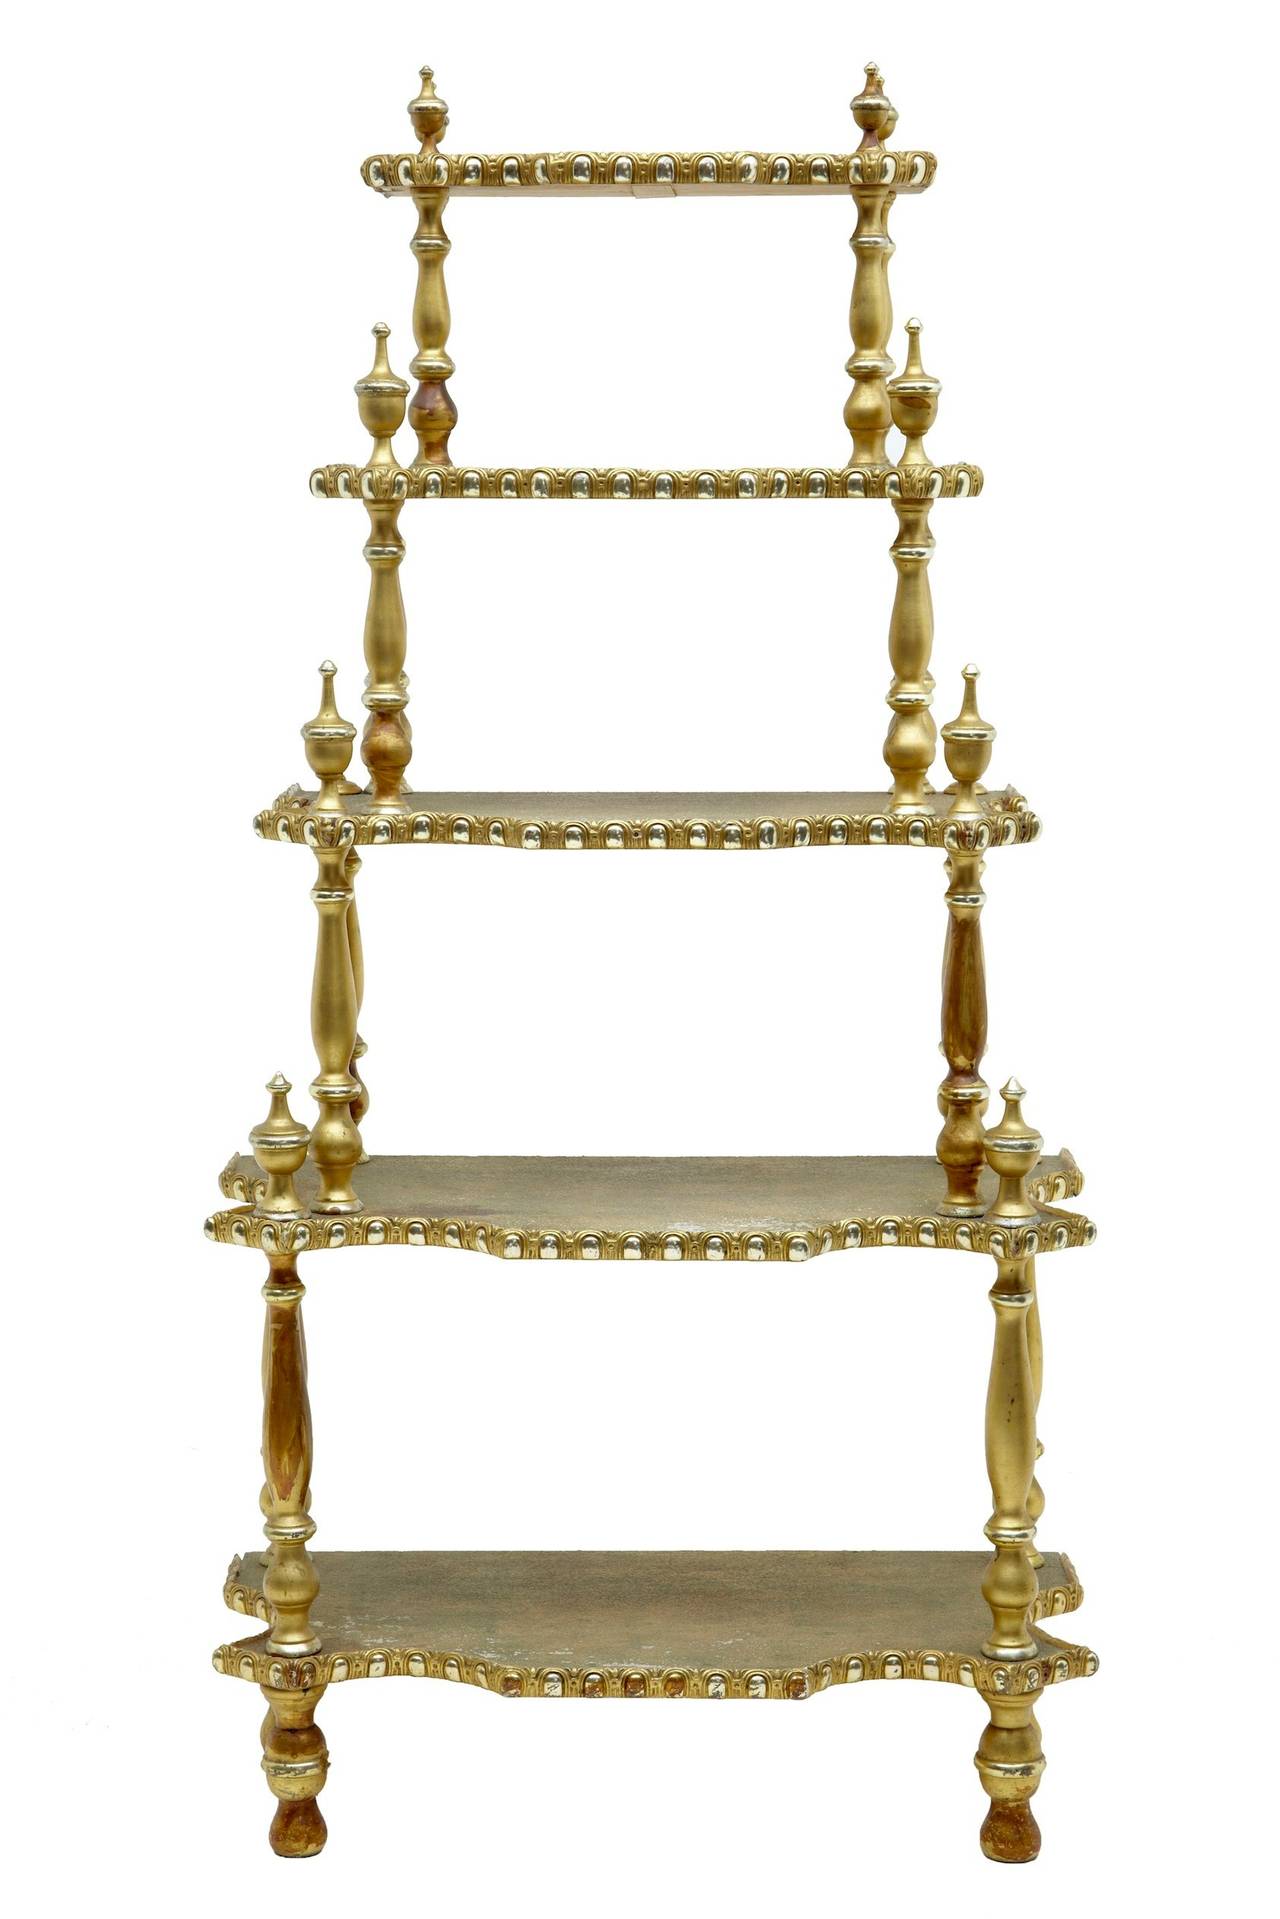 19th century French gilt carved whatnot stand

Unusual whatnot with eastern influences, circa 1890.

Five-tier stand with reverse egg and dart mouldings, united by four turned supports on each section.

Some losses to carving and